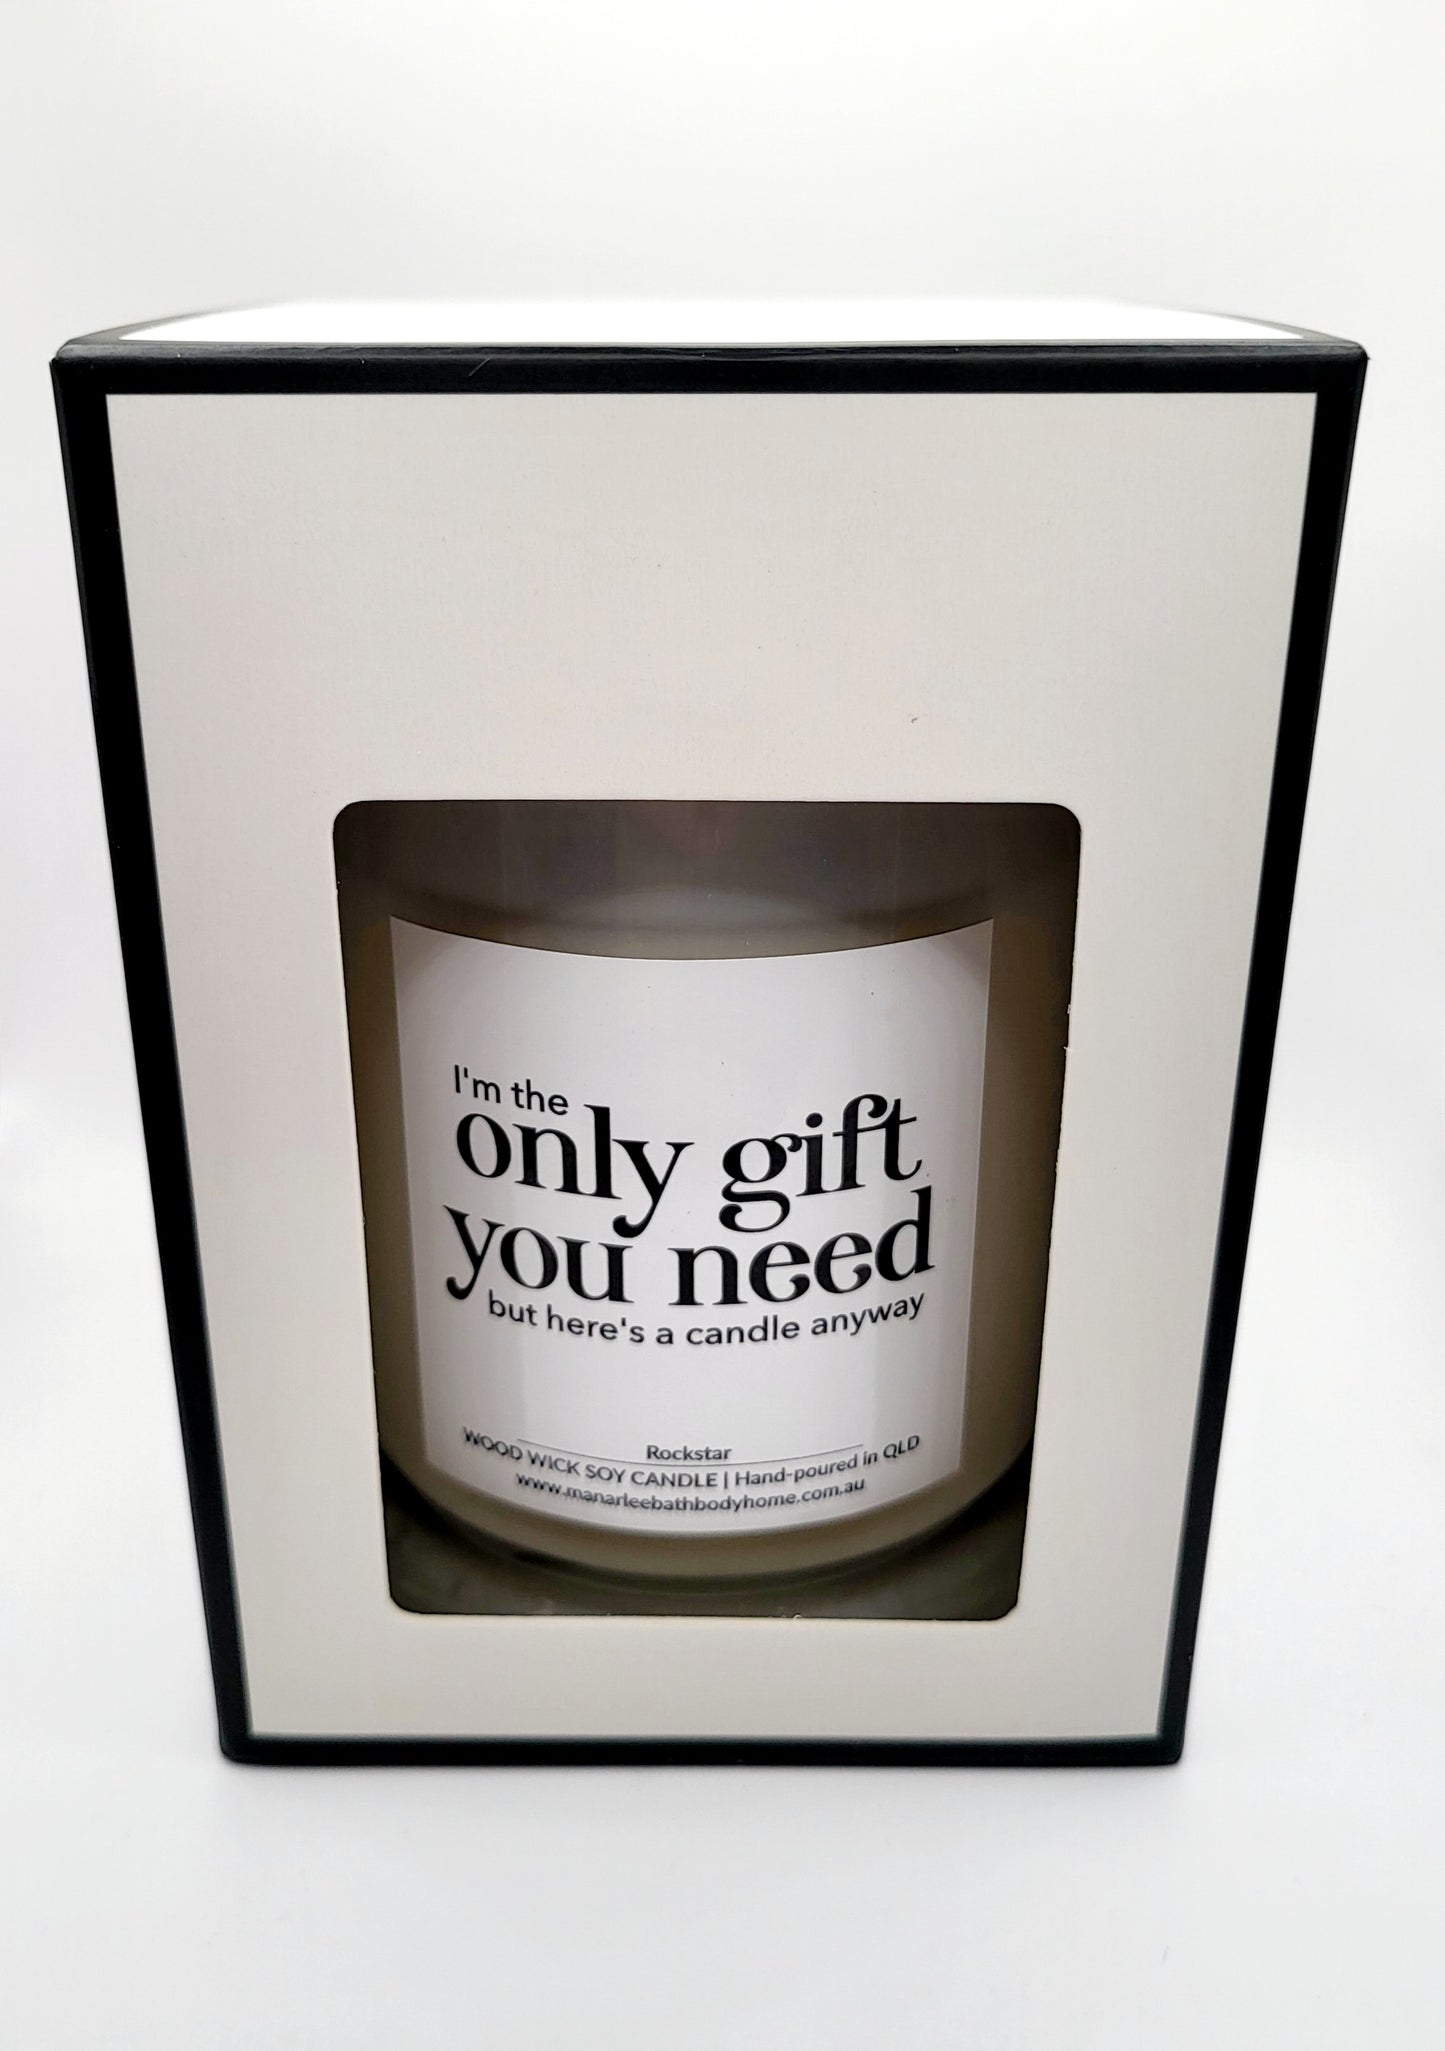 Wood Wick Scented Candle "I'm The Only Gift You Need But Here's A Candle Anyway"